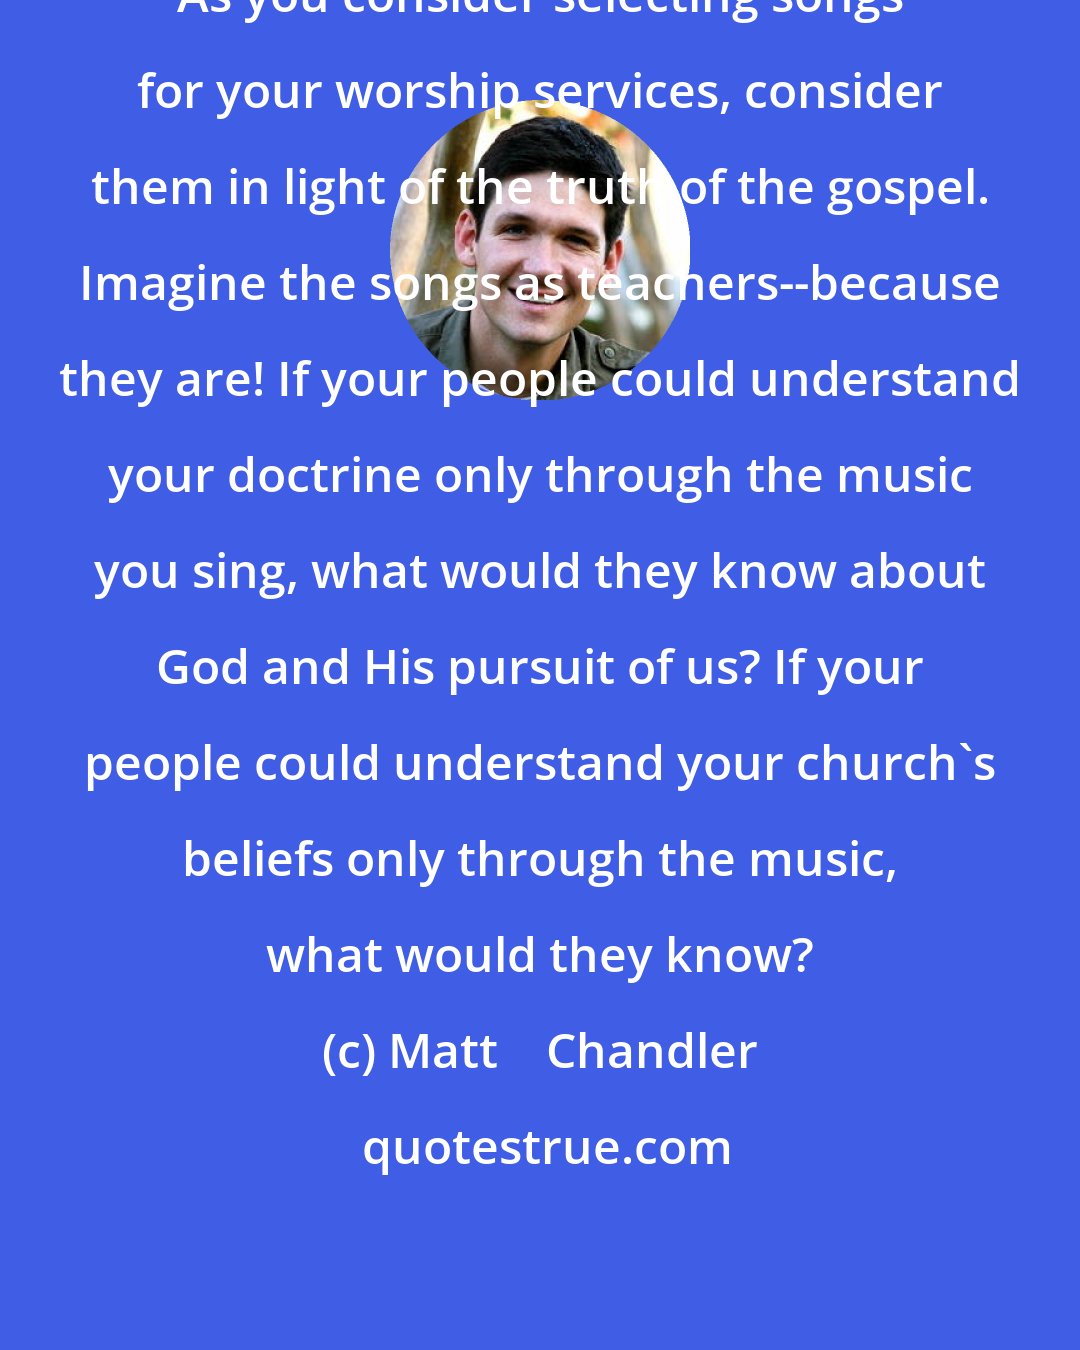 Matt    Chandler: As you consider selecting songs for your worship services, consider them in light of the truth of the gospel. Imagine the songs as teachers--because they are! If your people could understand your doctrine only through the music you sing, what would they know about God and His pursuit of us? If your people could understand your church's beliefs only through the music, what would they know?